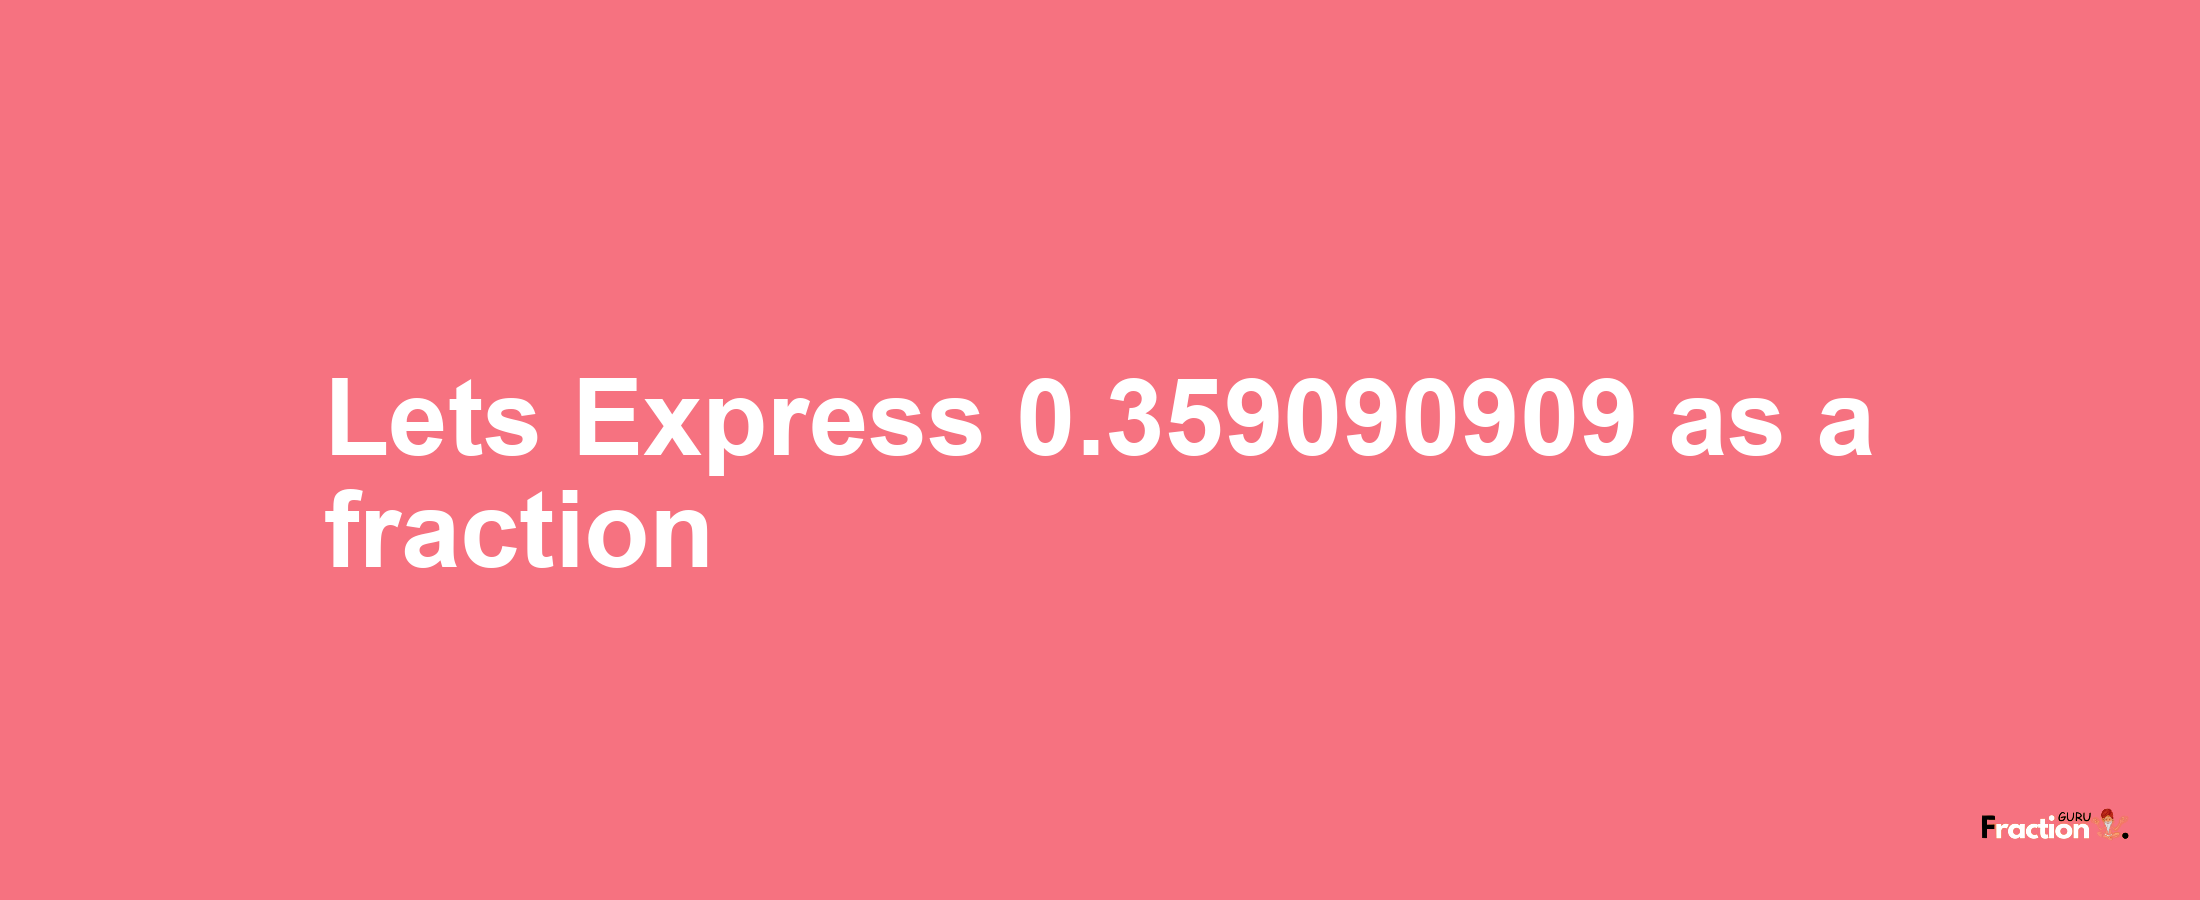 Lets Express 0.359090909 as afraction